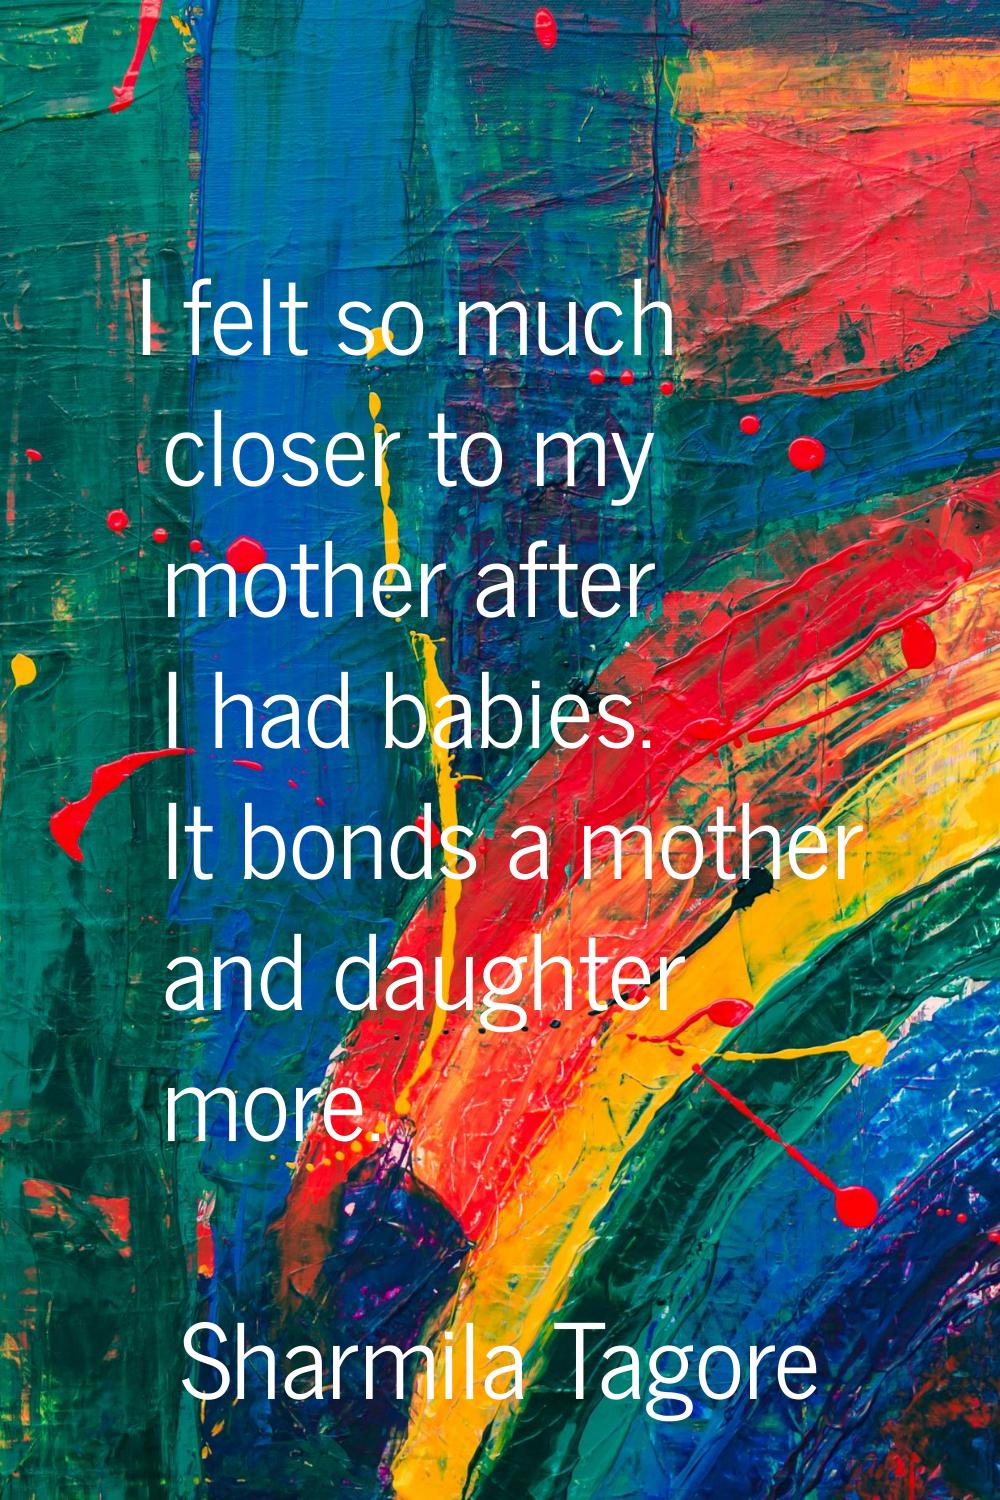 I felt so much closer to my mother after I had babies. It bonds a mother and daughter more.